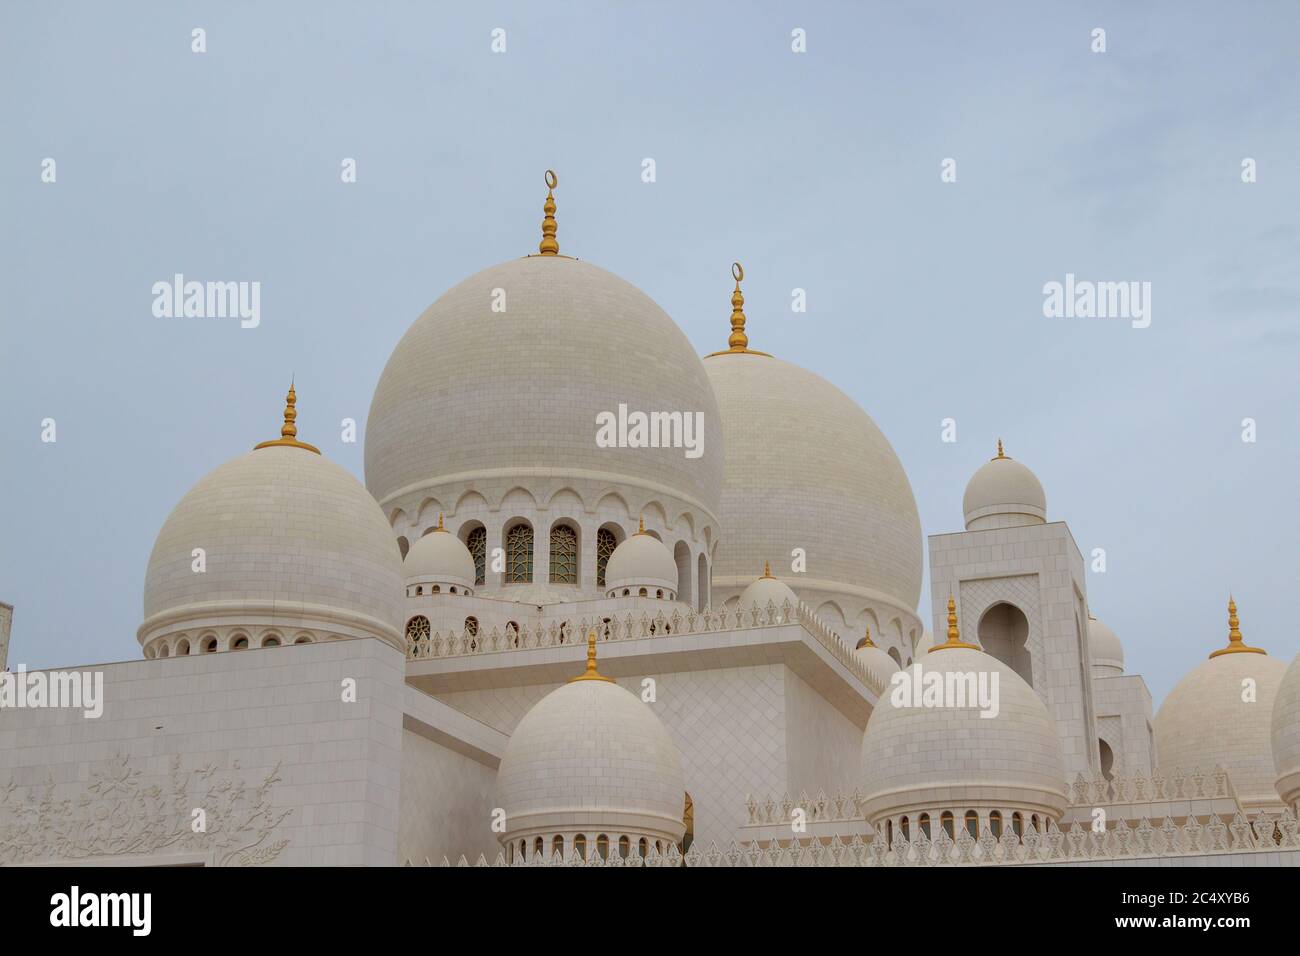 Abu Dhabi, UAE - CIRCA 2020:Sheikh Zayed Grand Mosque in Abu Dhabi, exterior view during the sunset located at the capital city of United Arab Emirate Stock Photo